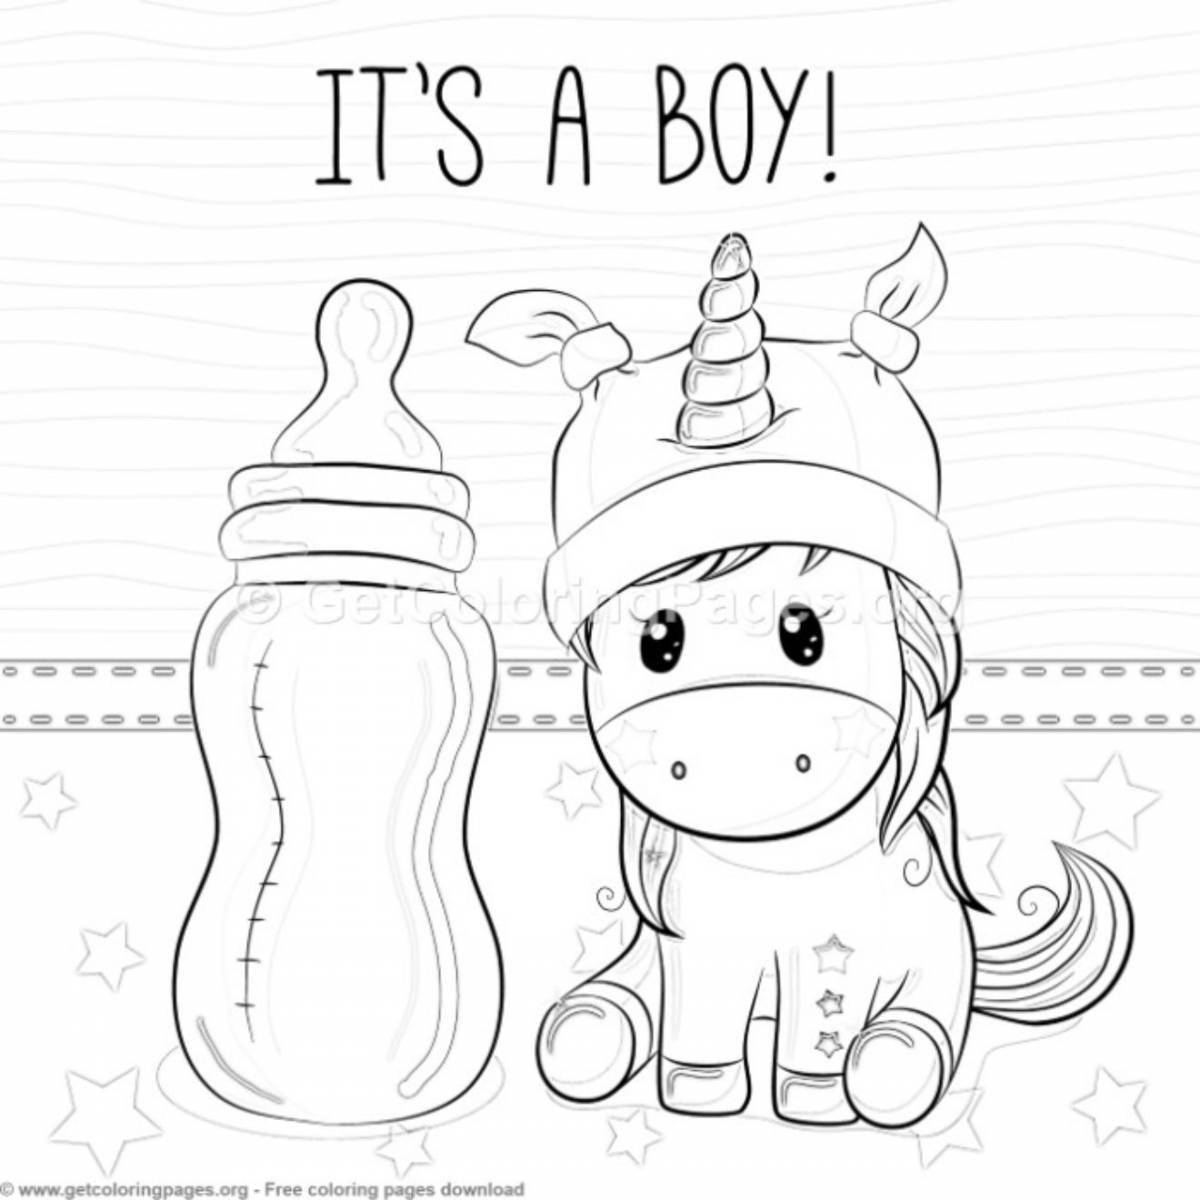 Adorable unicorn puppy coloring page with surprise